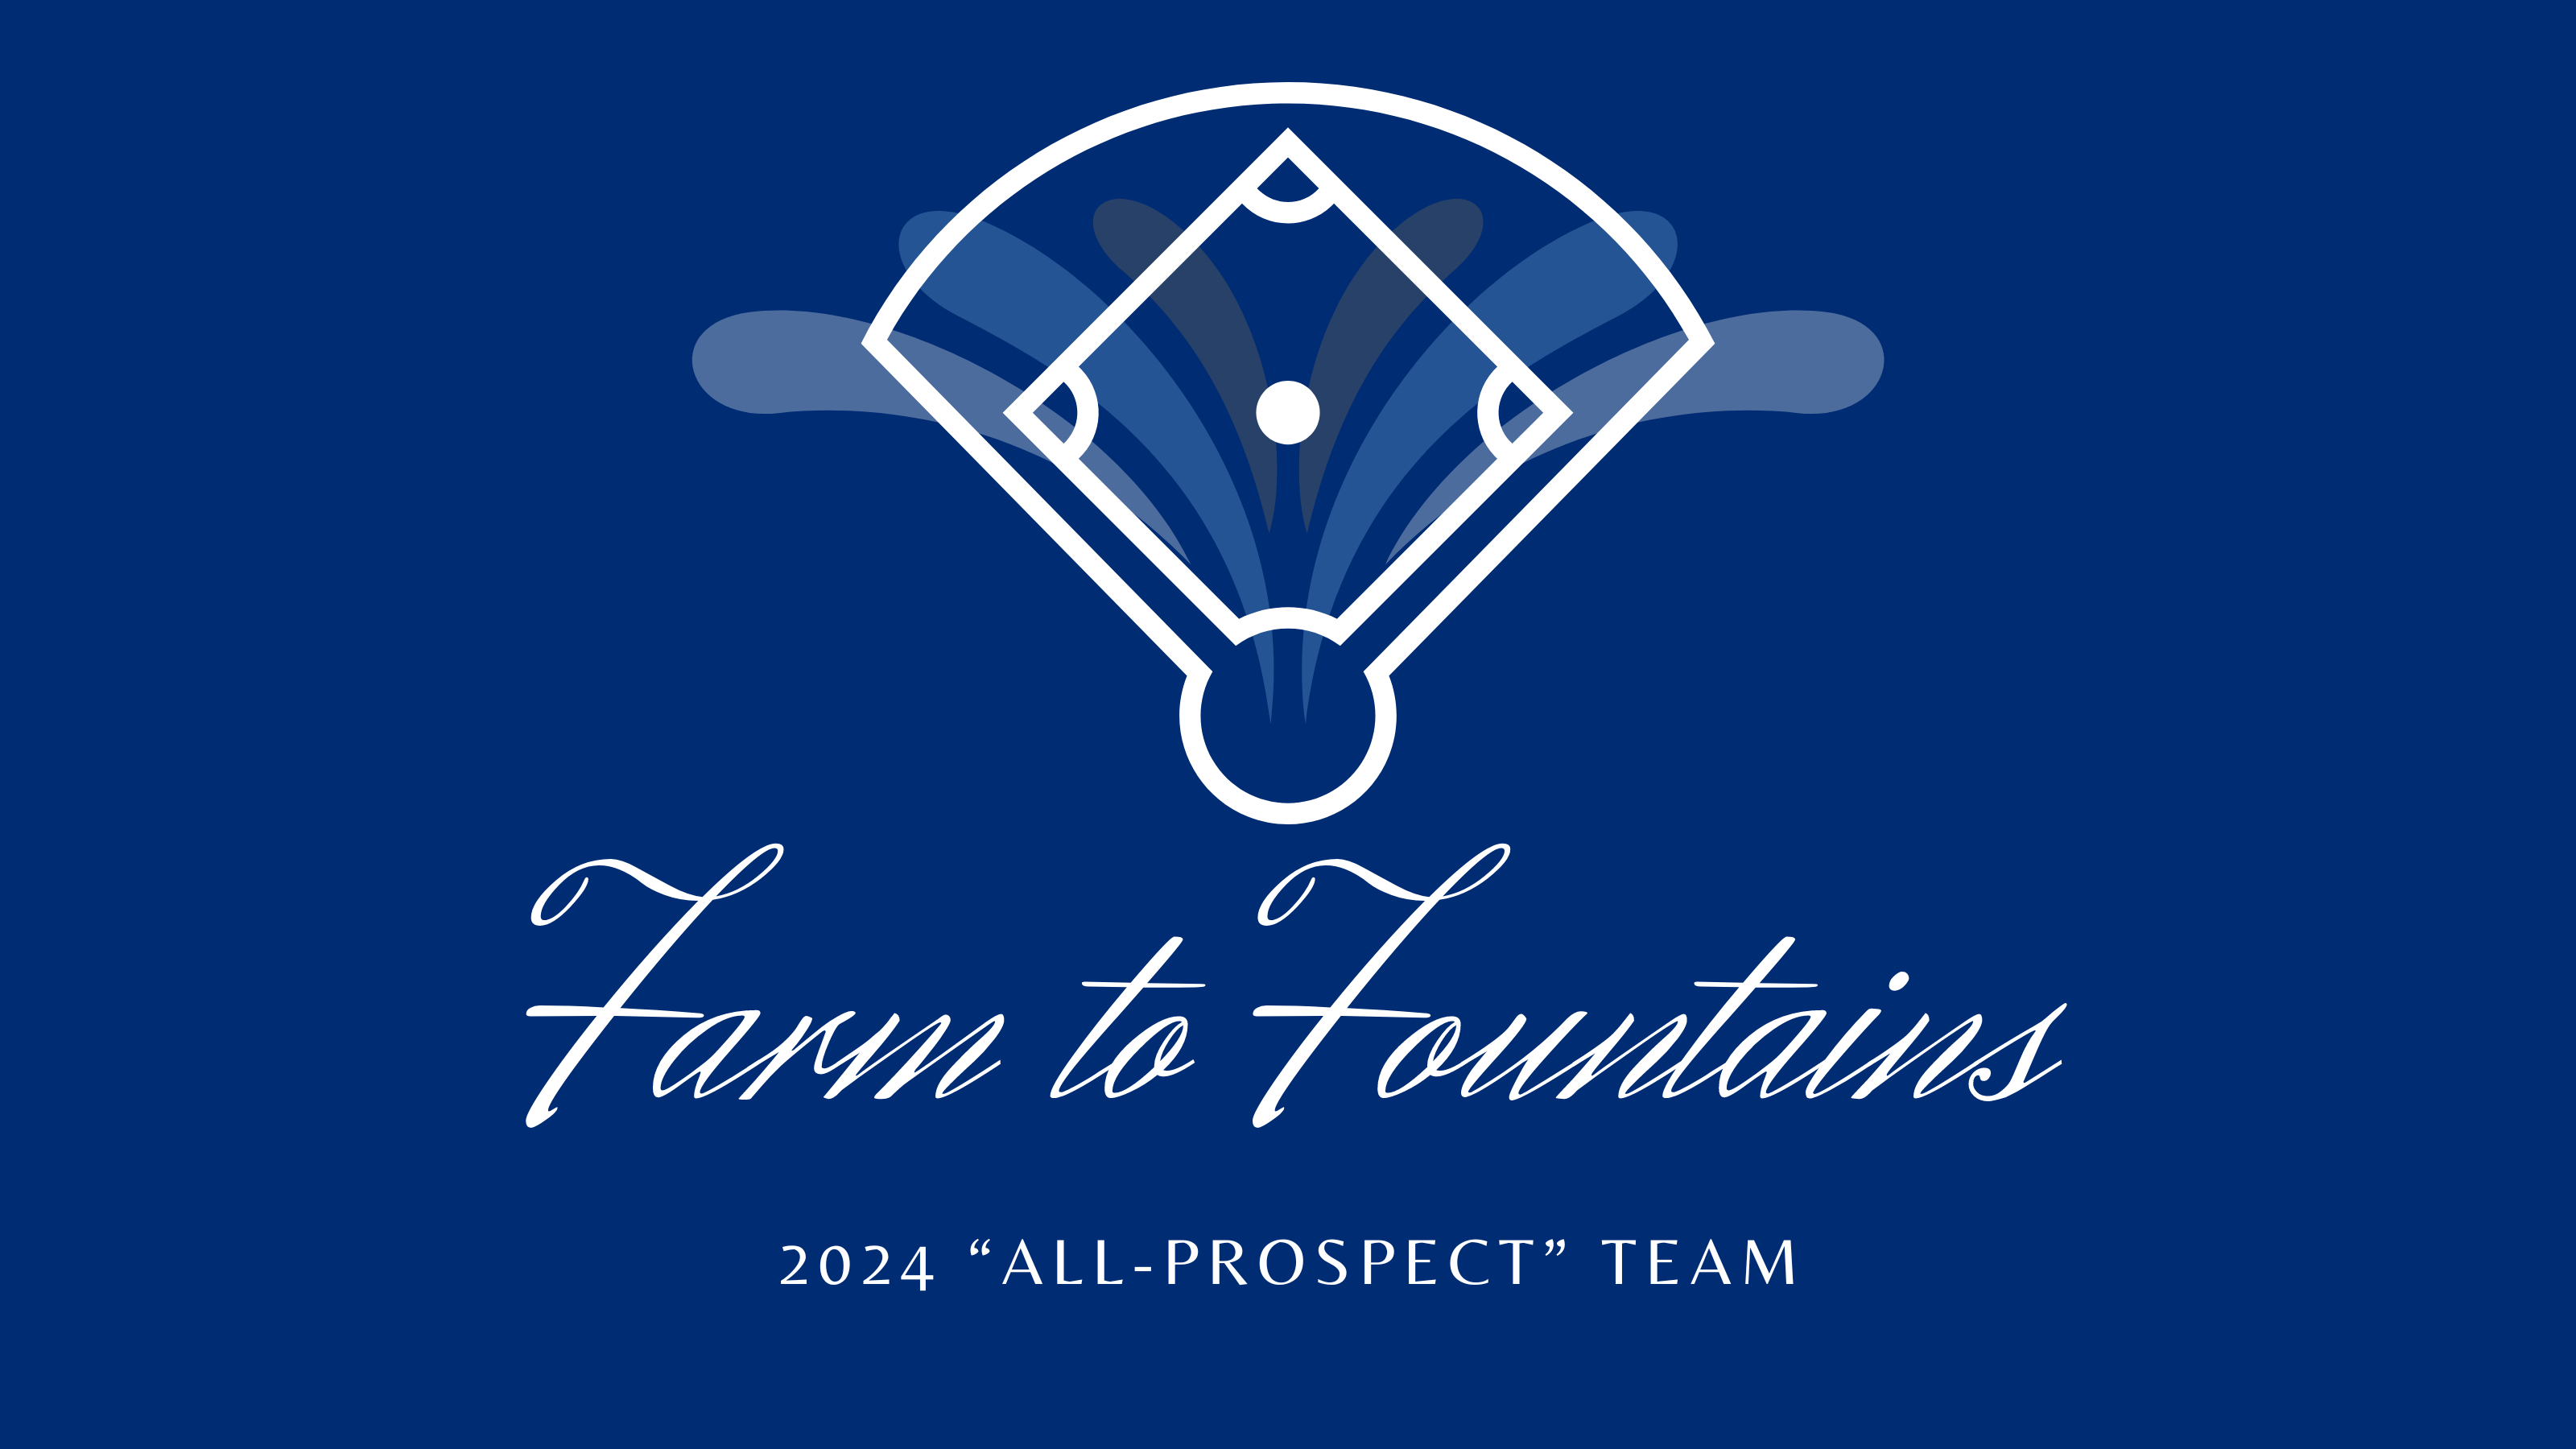 A Look at the 2024 Royals “All-Prospect” Team